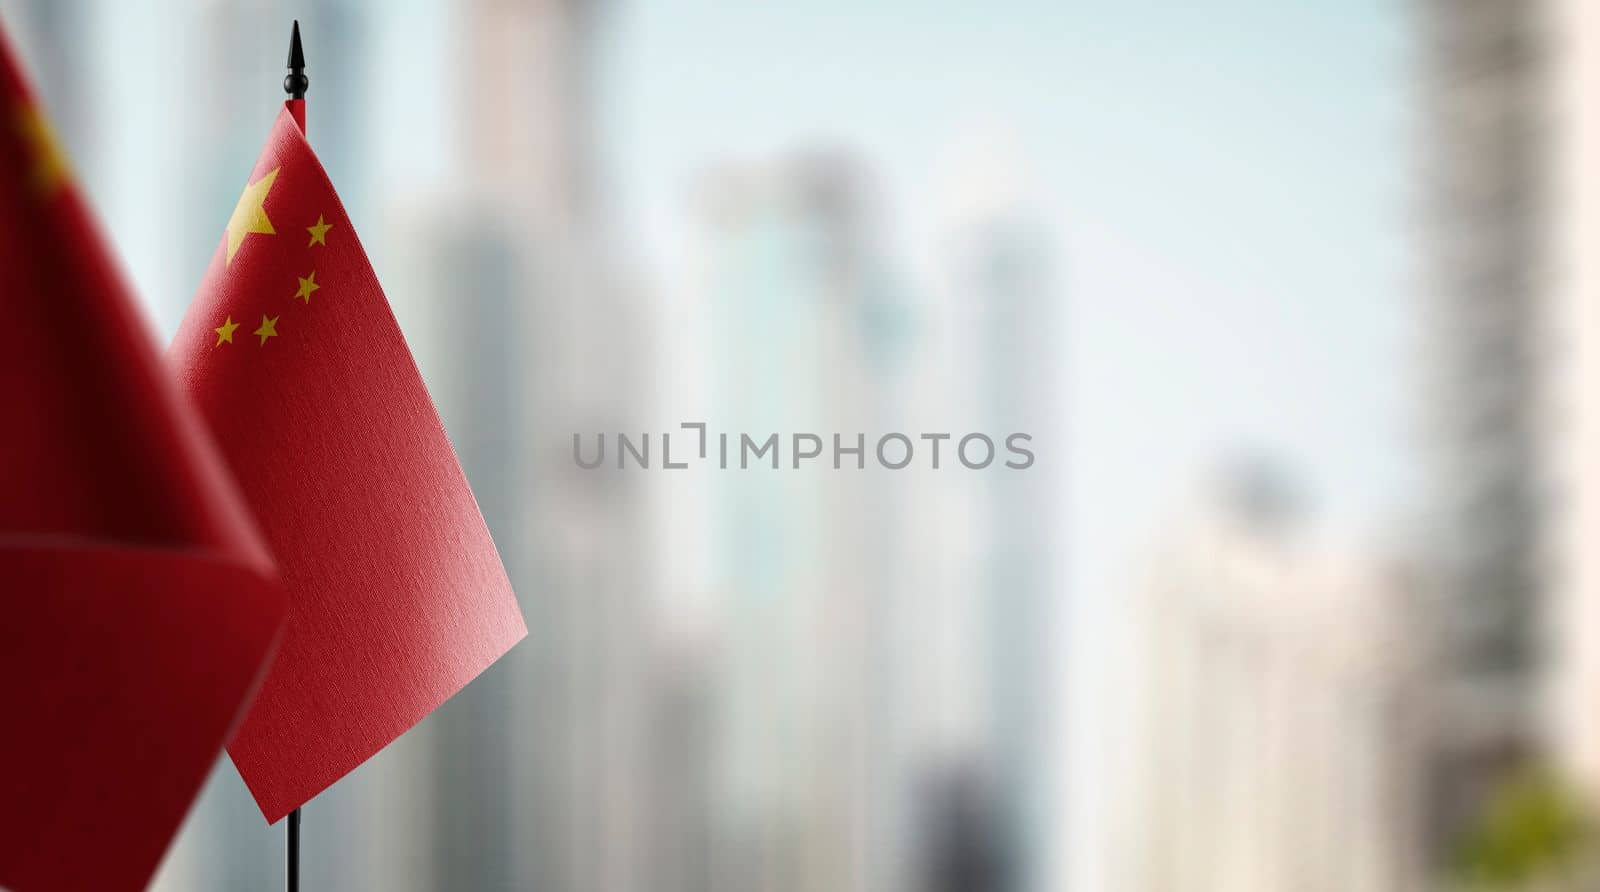 Small flags of the China on an abstract blurry background.